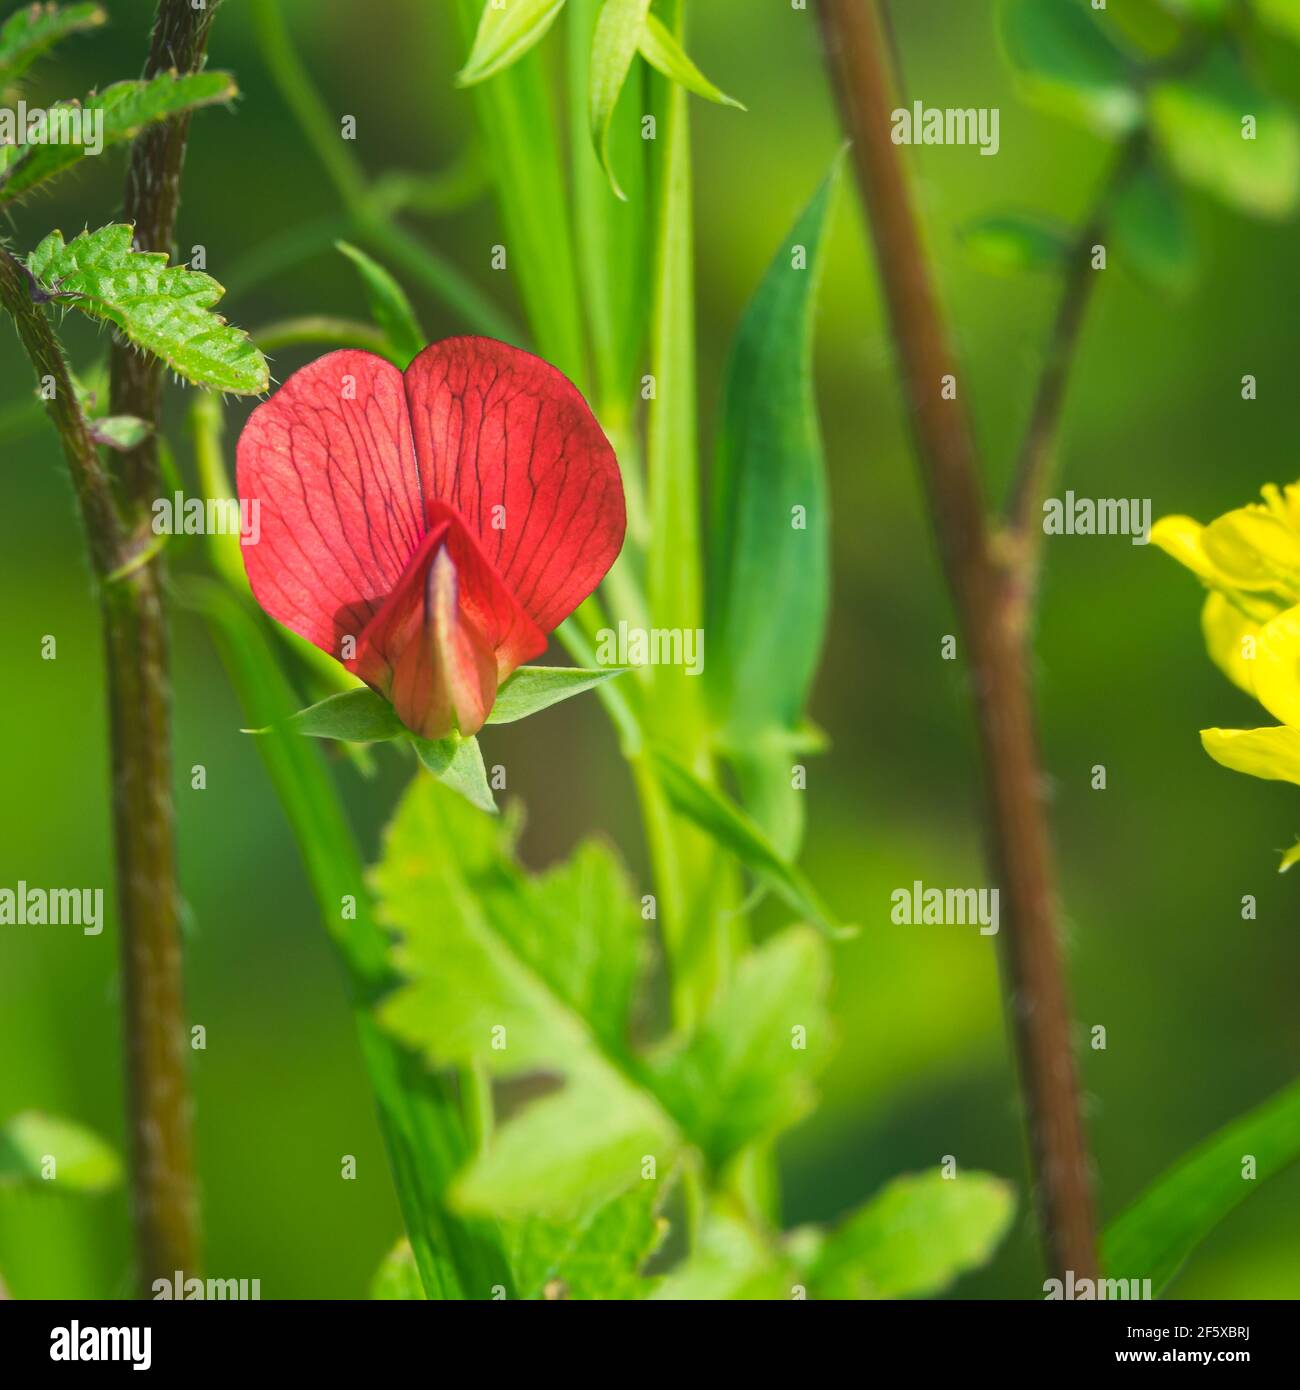 Detail of red flower of winged pea (Tetragonolobus purpureus) in the meadow Stock Photo